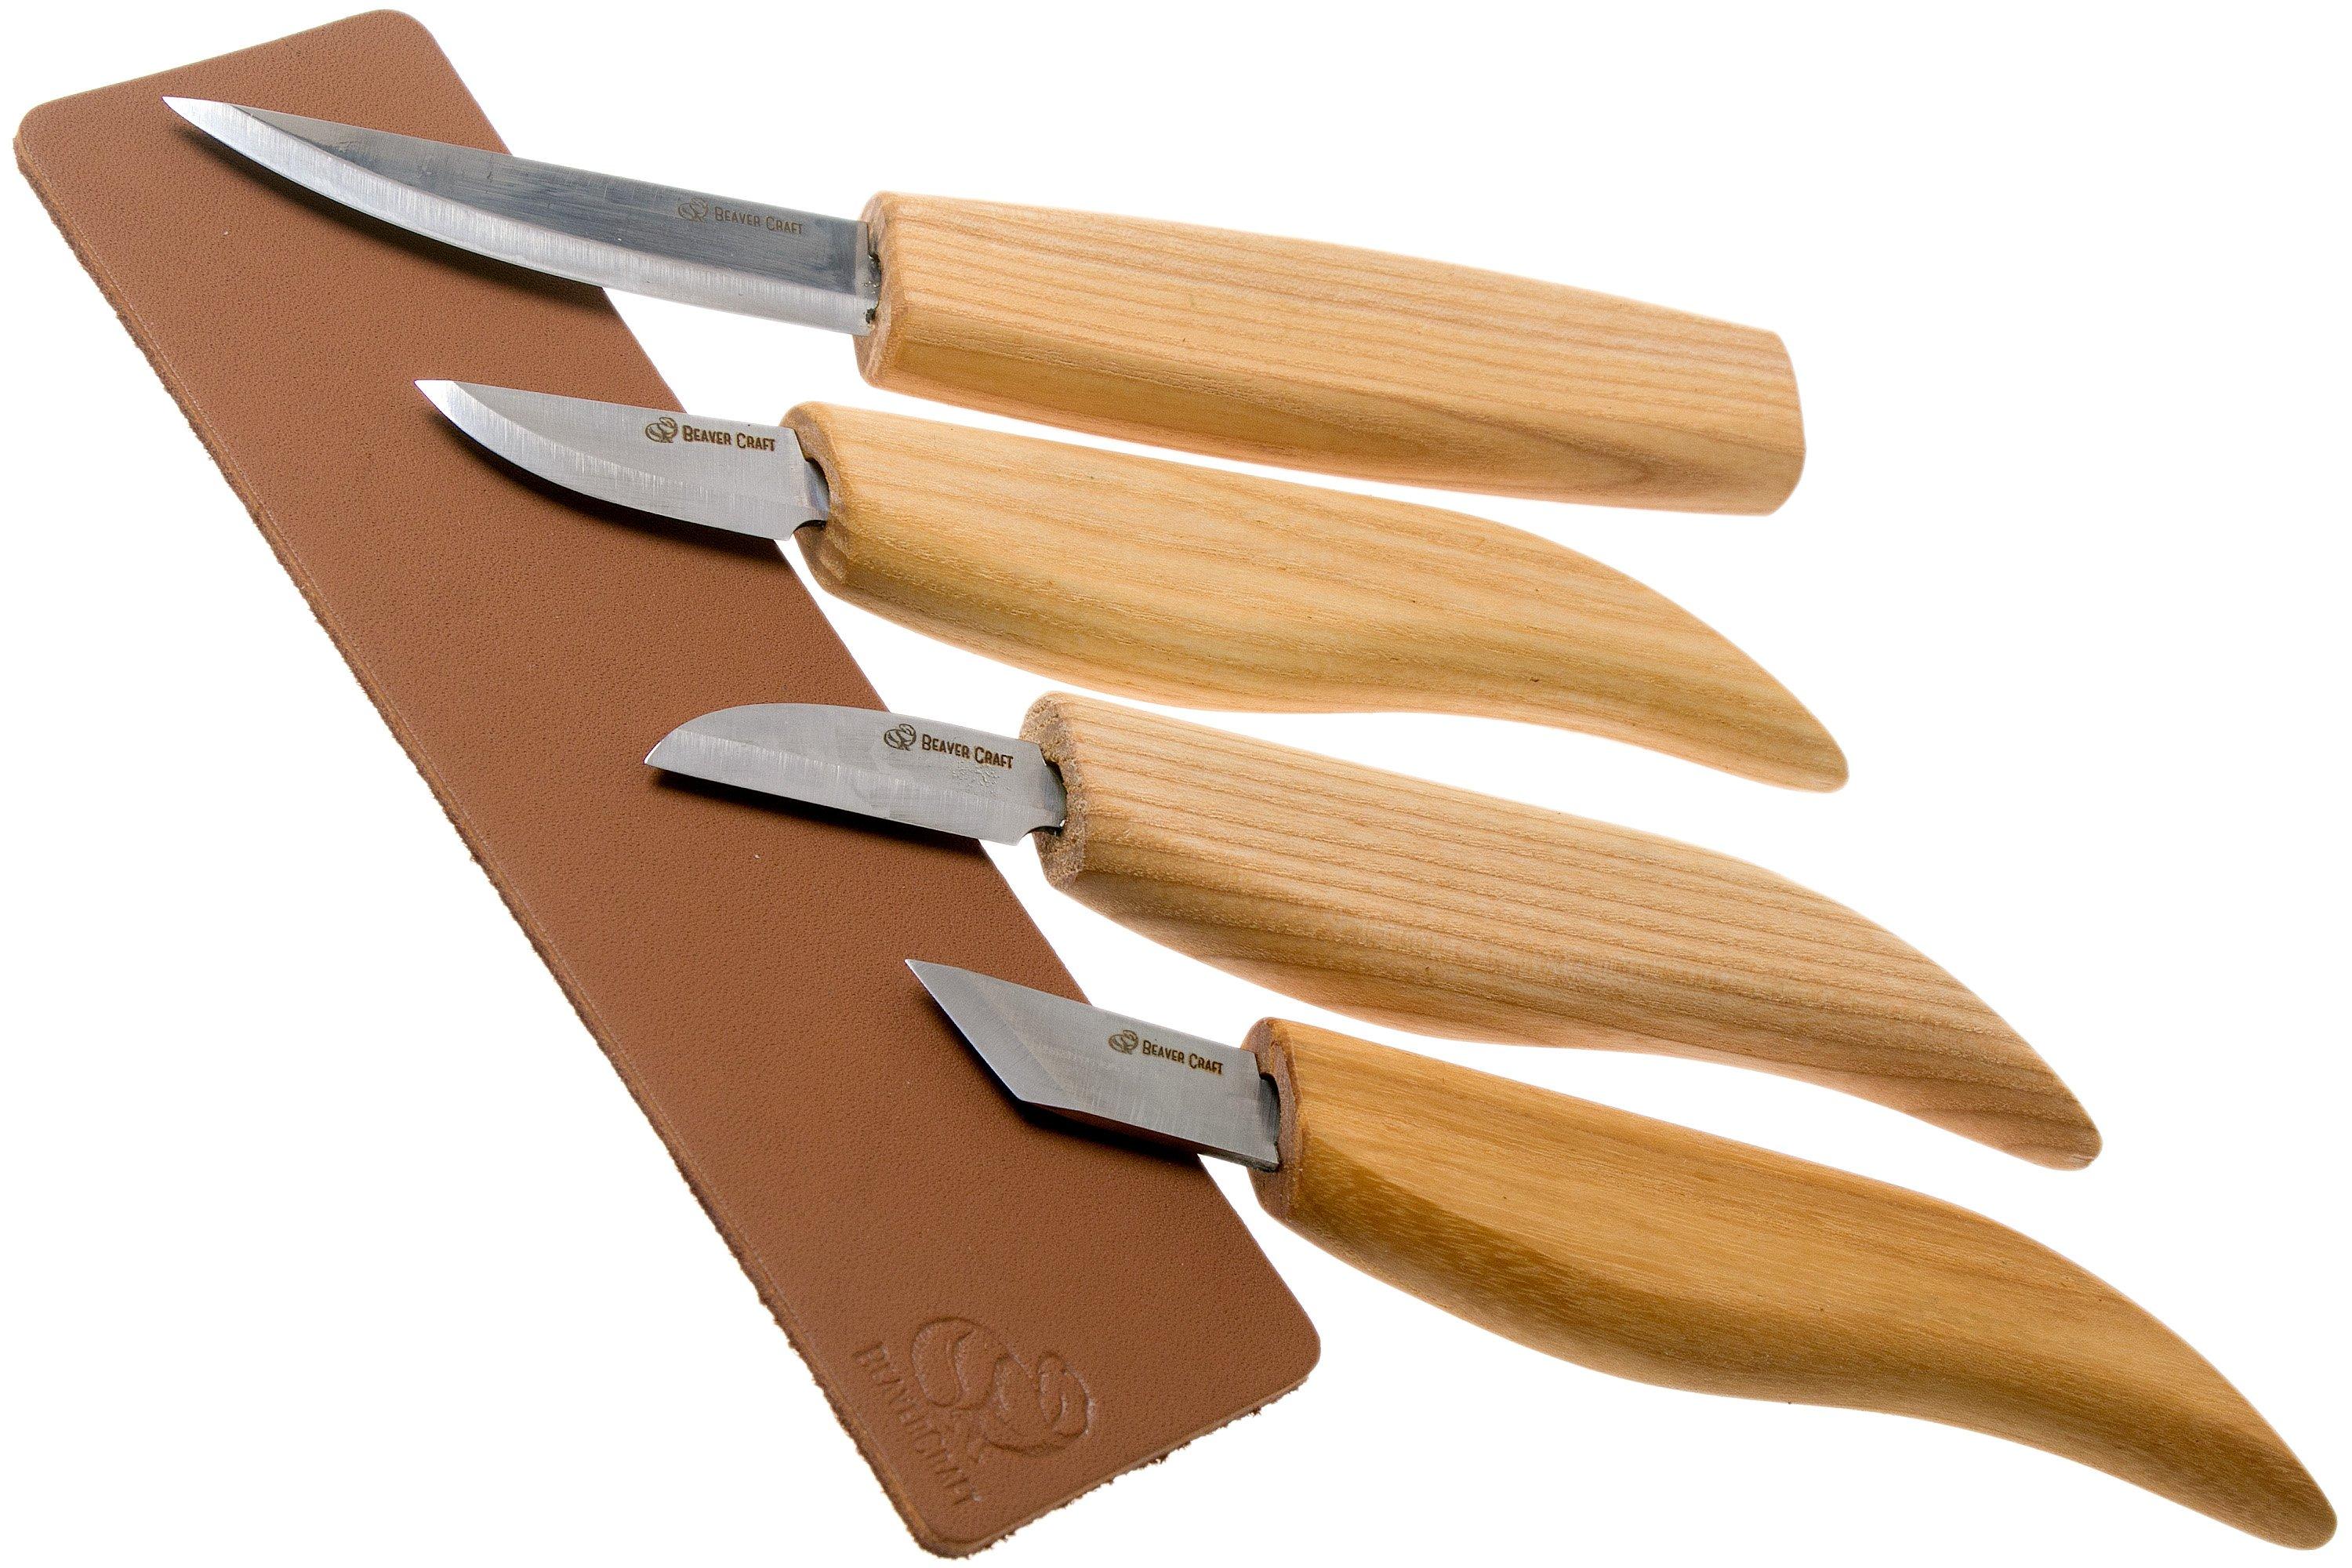 BeaverCraft Basic Set of 4 Knives S07 Book wood carving set with wooden  storage book